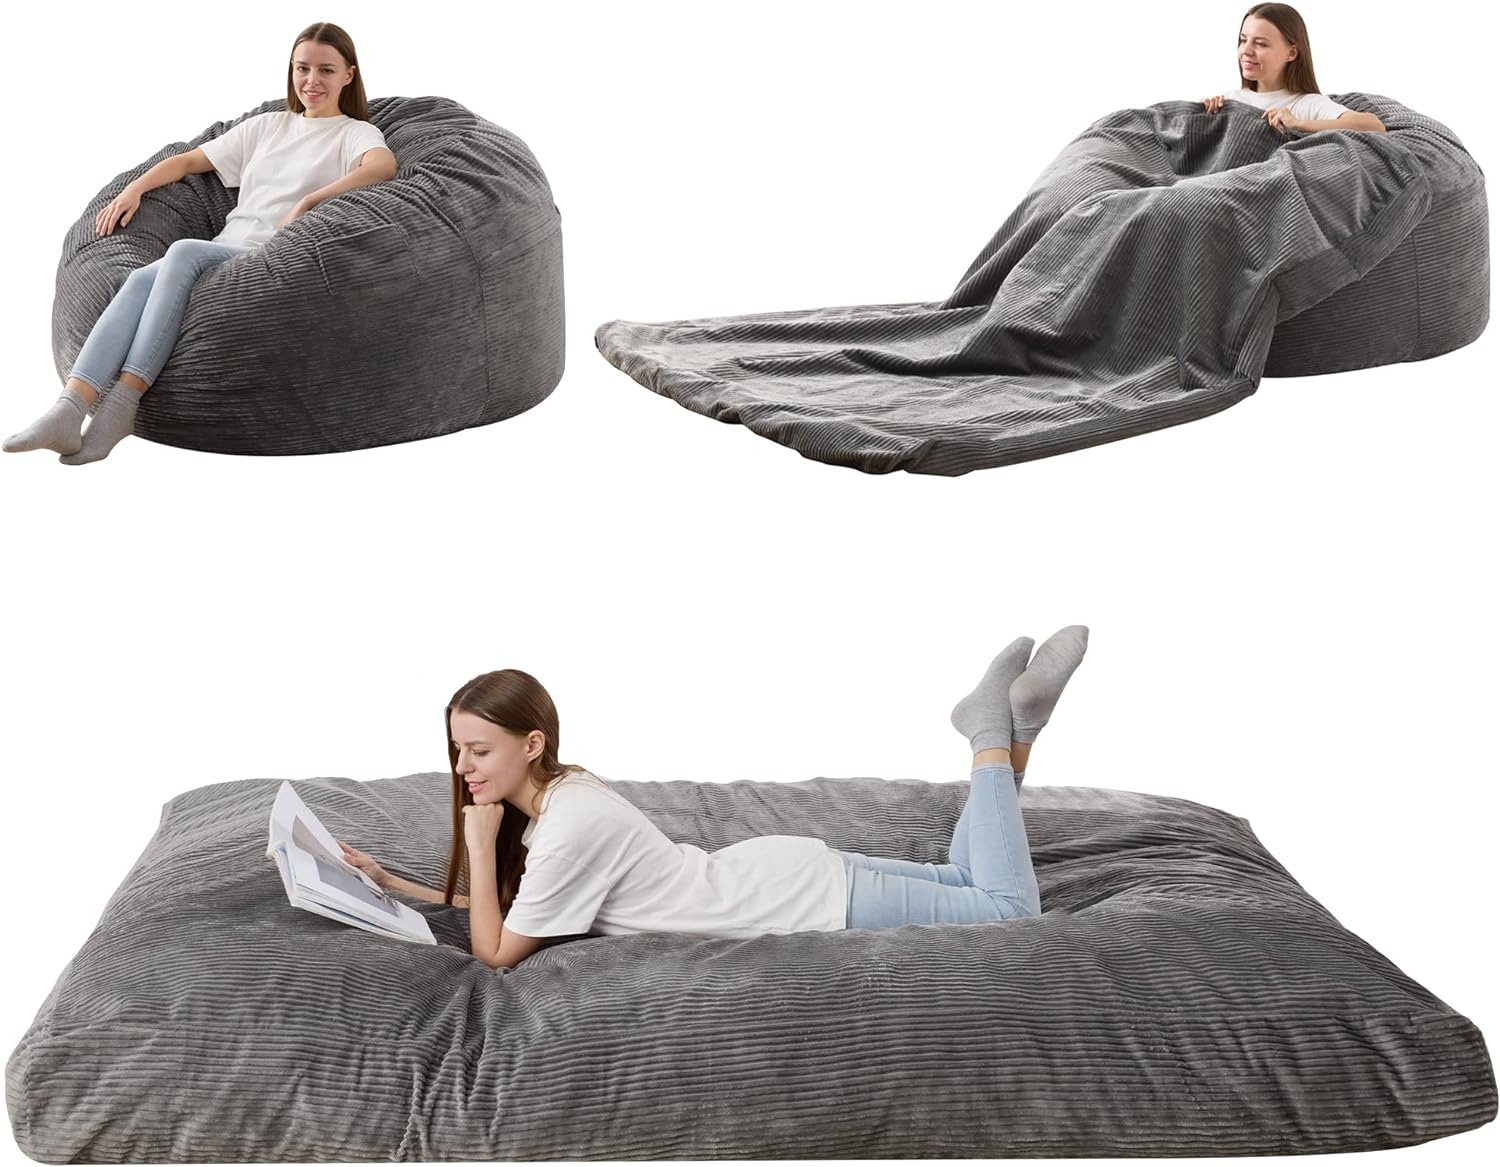 HABUTWAY Bean Bag Chair, Giant Bean Bag Chair with Washable Corduroy Cover Ultra Soft, Convertible Bean Bag from Chair to Mattress, Huge Cordoroys Bean Bags for Adult, Couples, Family - Grey Queen